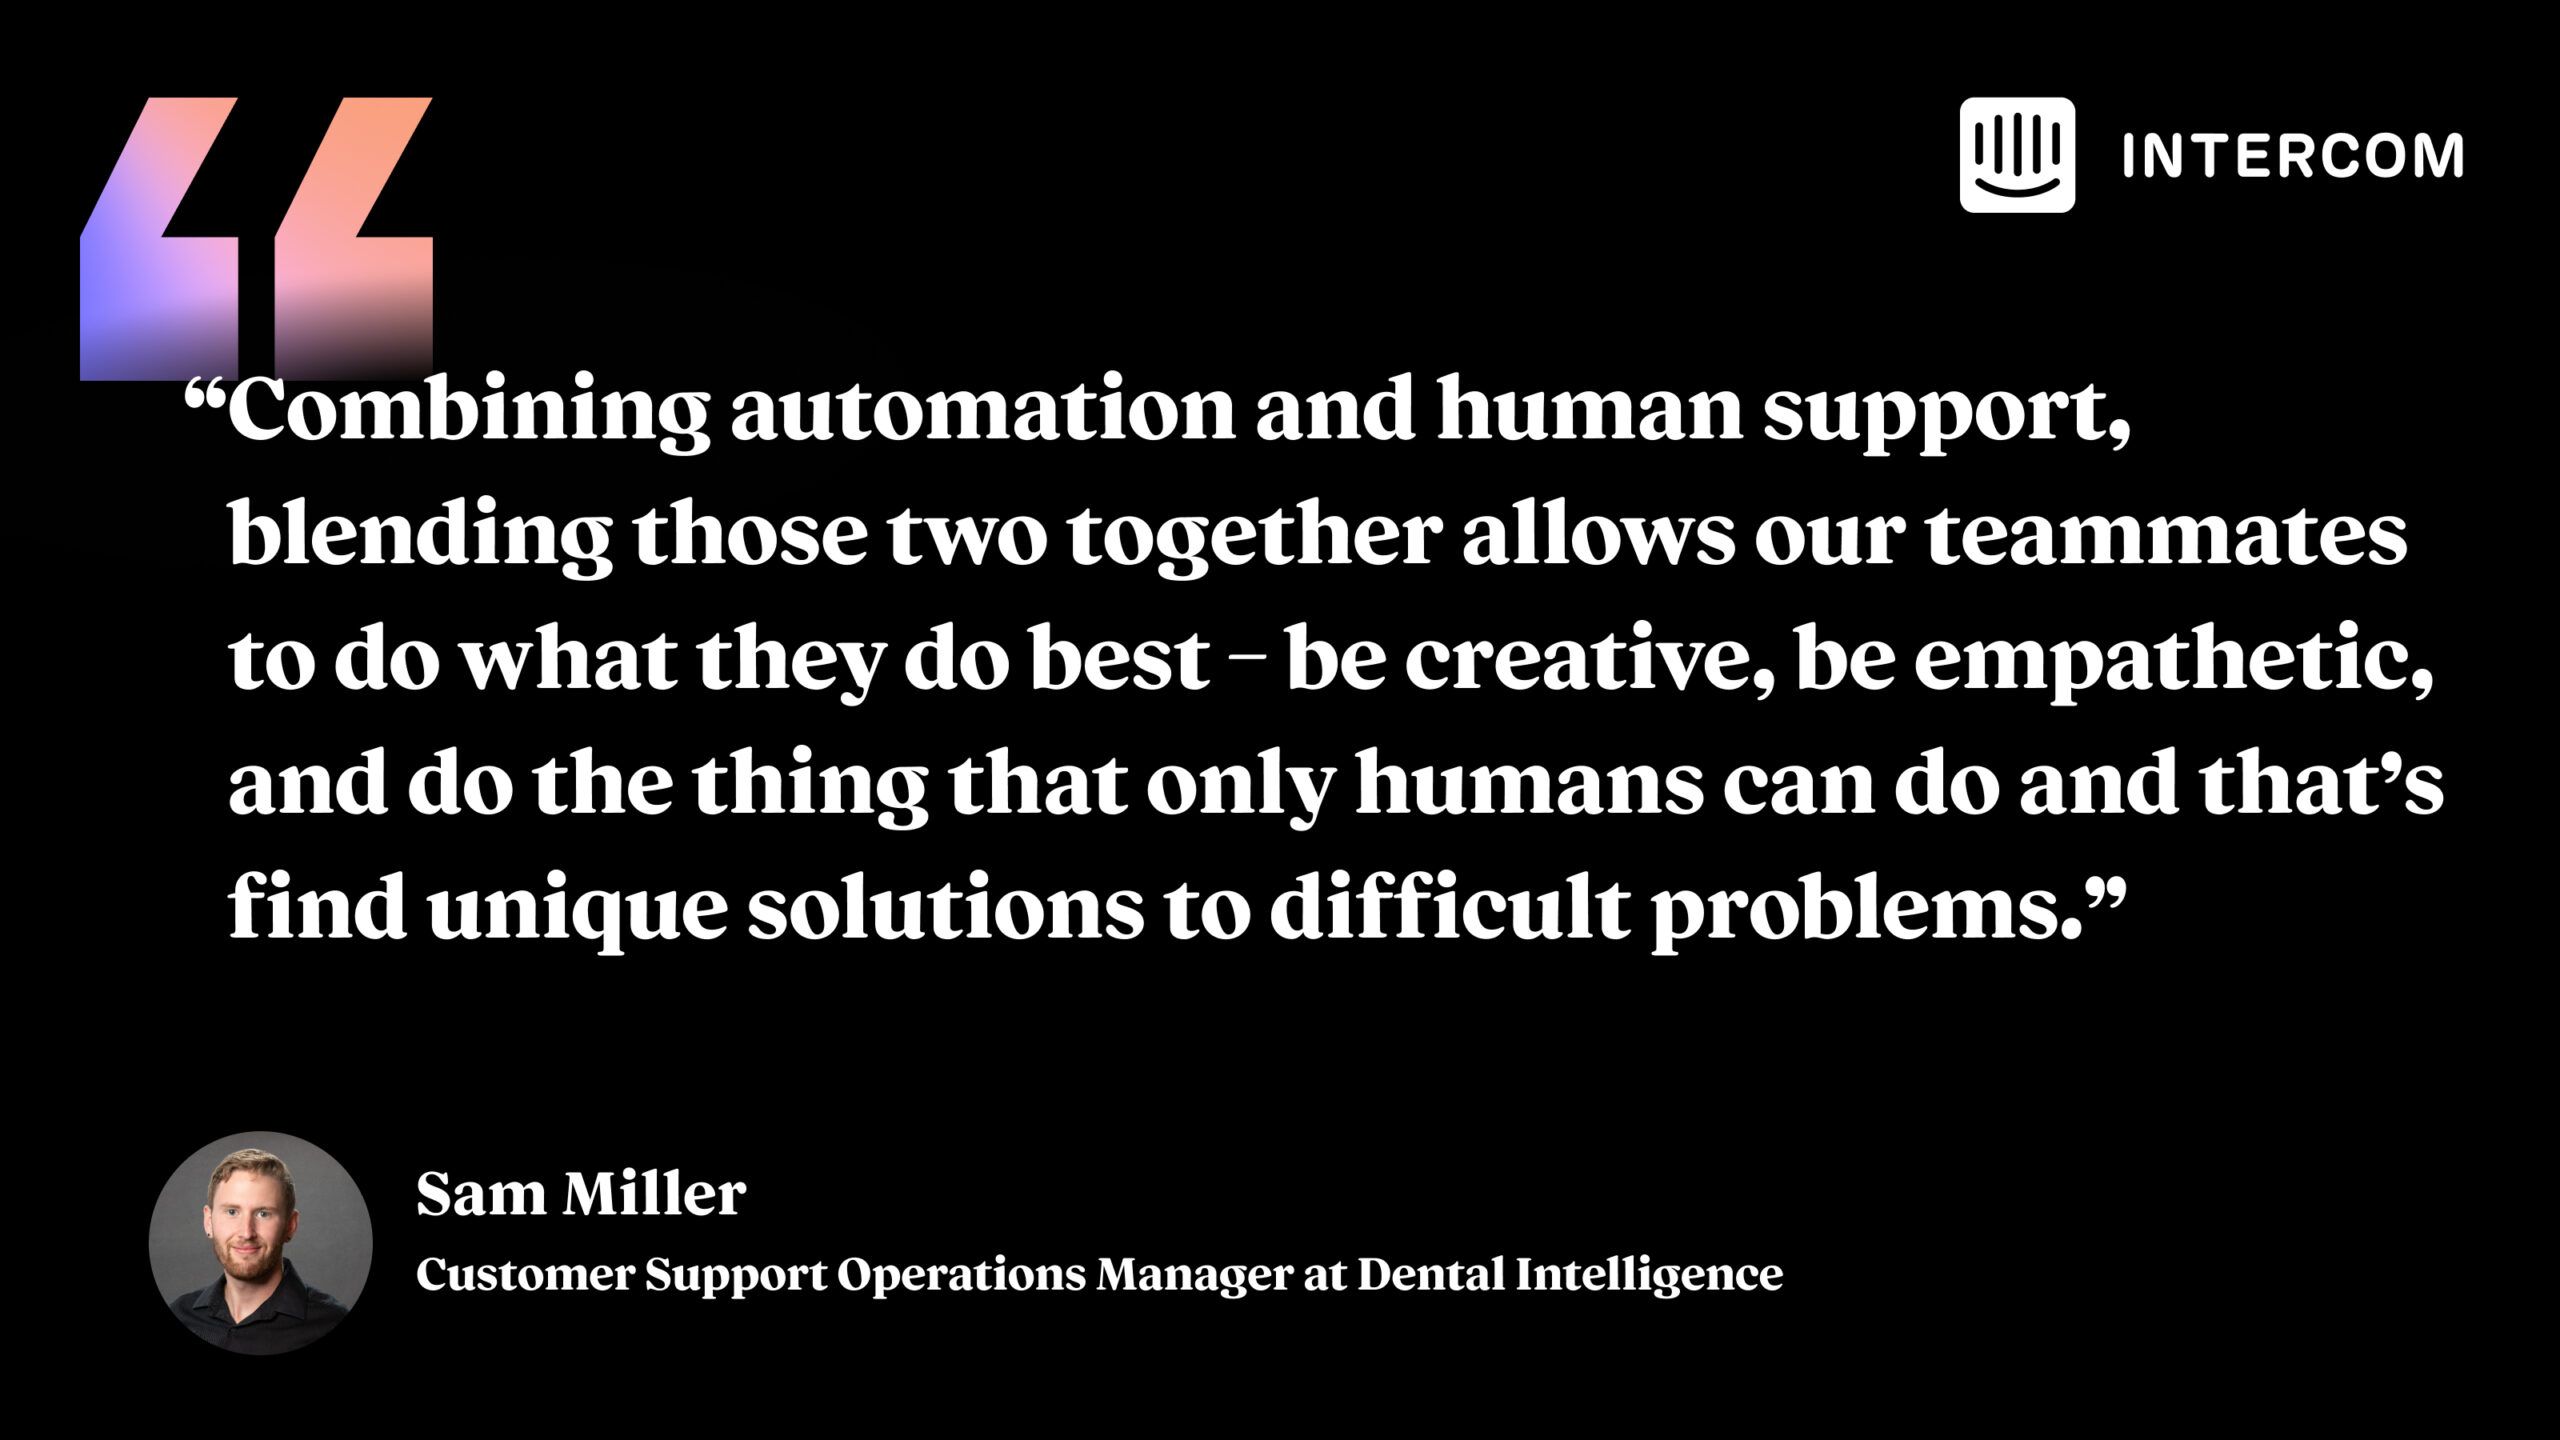 “Combining automation and human support, blending those two together allows our teammates to do what they do best – be creative, be empathetic, and do the thing that only humans can do and that’s find unique solutions to difficult problems.” Sam Miller, Customer Support Operations Manager at Dental Intelligence. 